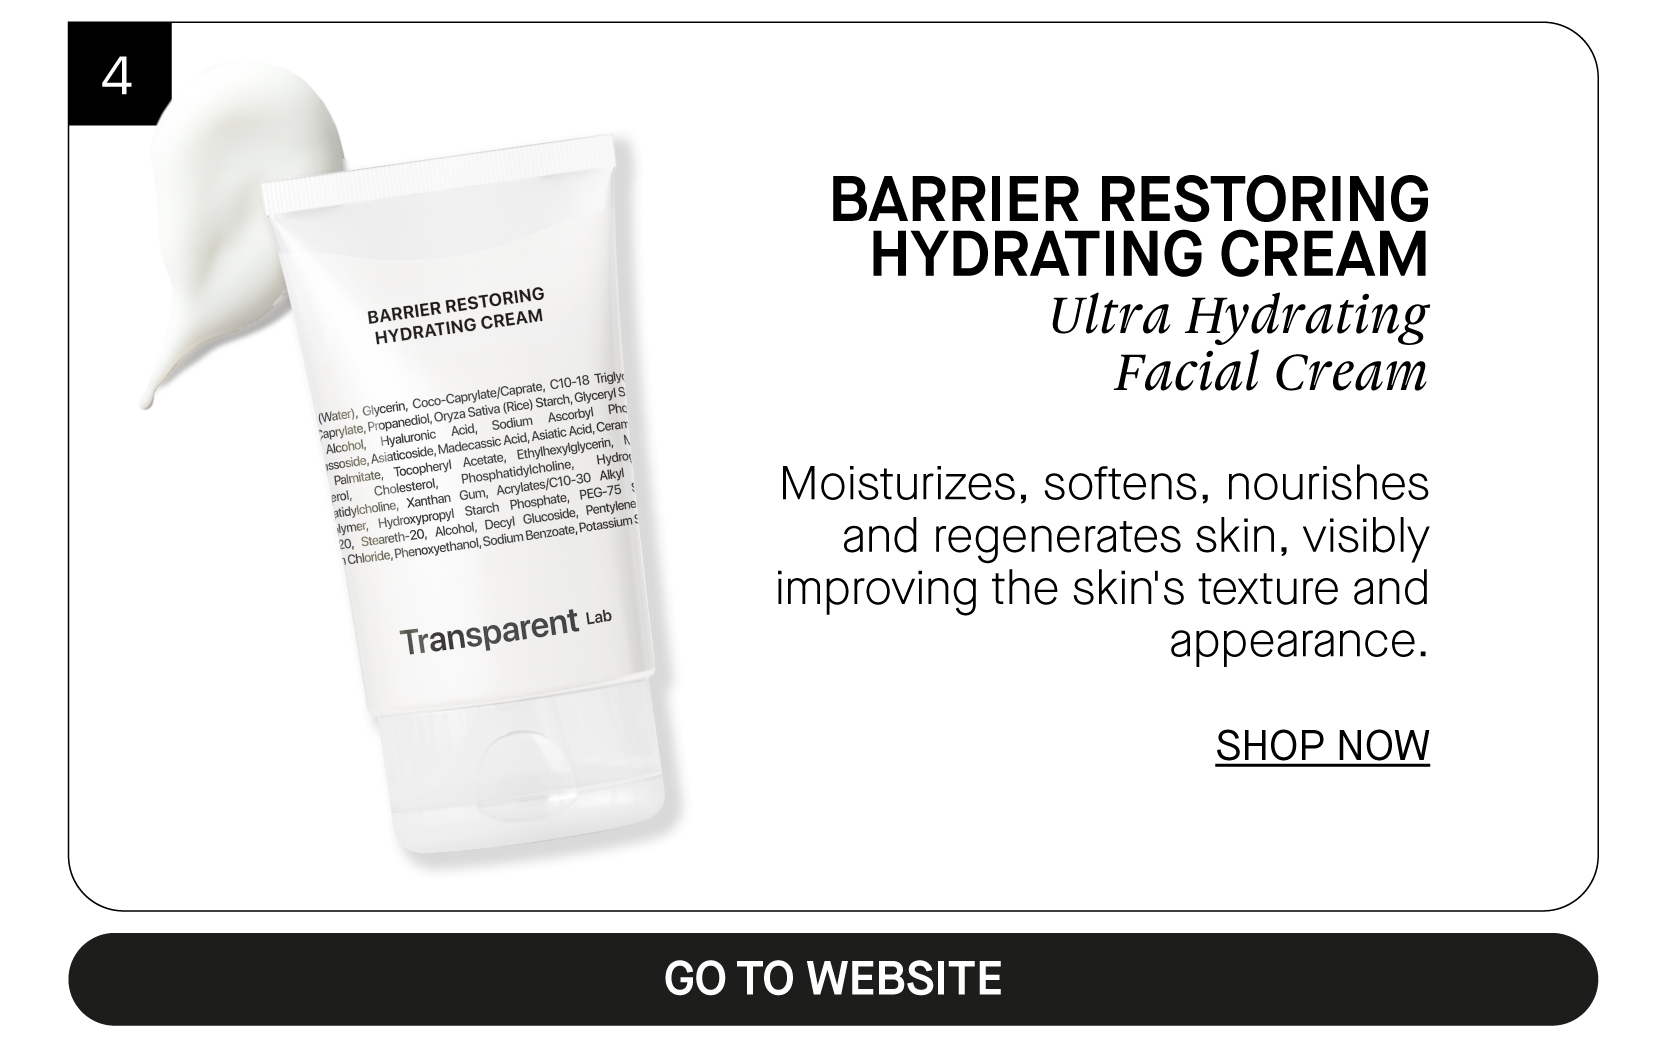  BARRIER RESTORING HYDRATING CREAM Ultra Hydrating Facial Cream Moisturizes, softens, nourishes and regenerates skin, visibly improving the skin's texture and appearance. SHOP NOW N GO TO WEBSITE 